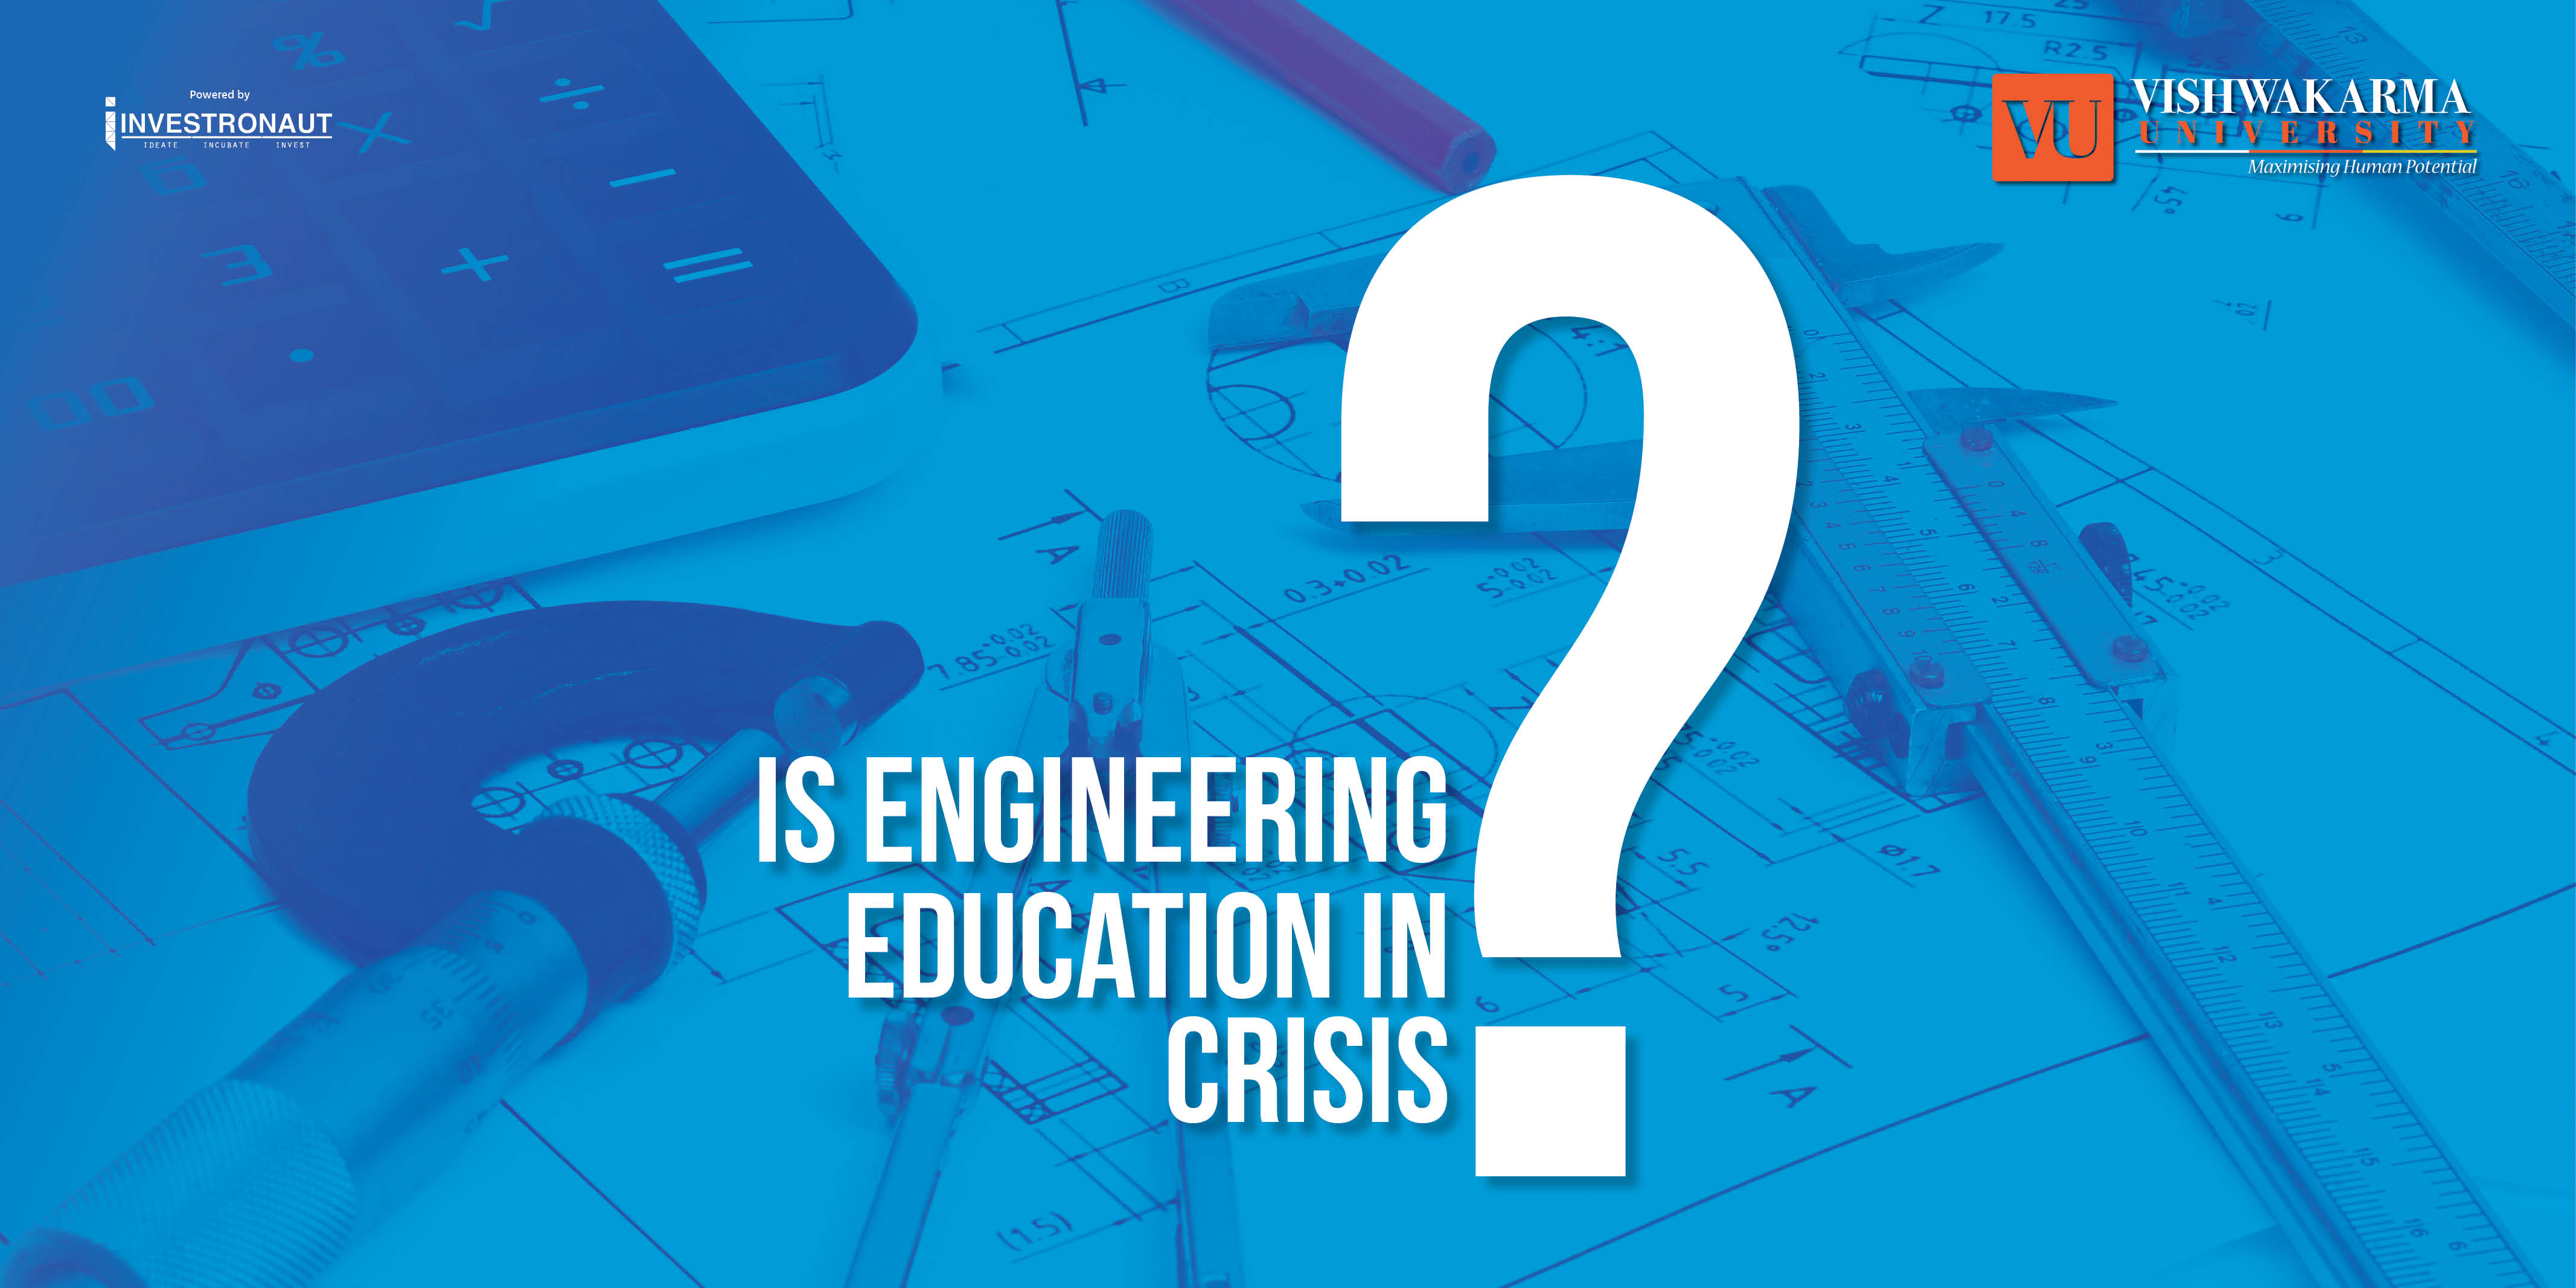 Linkedlin Post For Engineering Education in Crisis